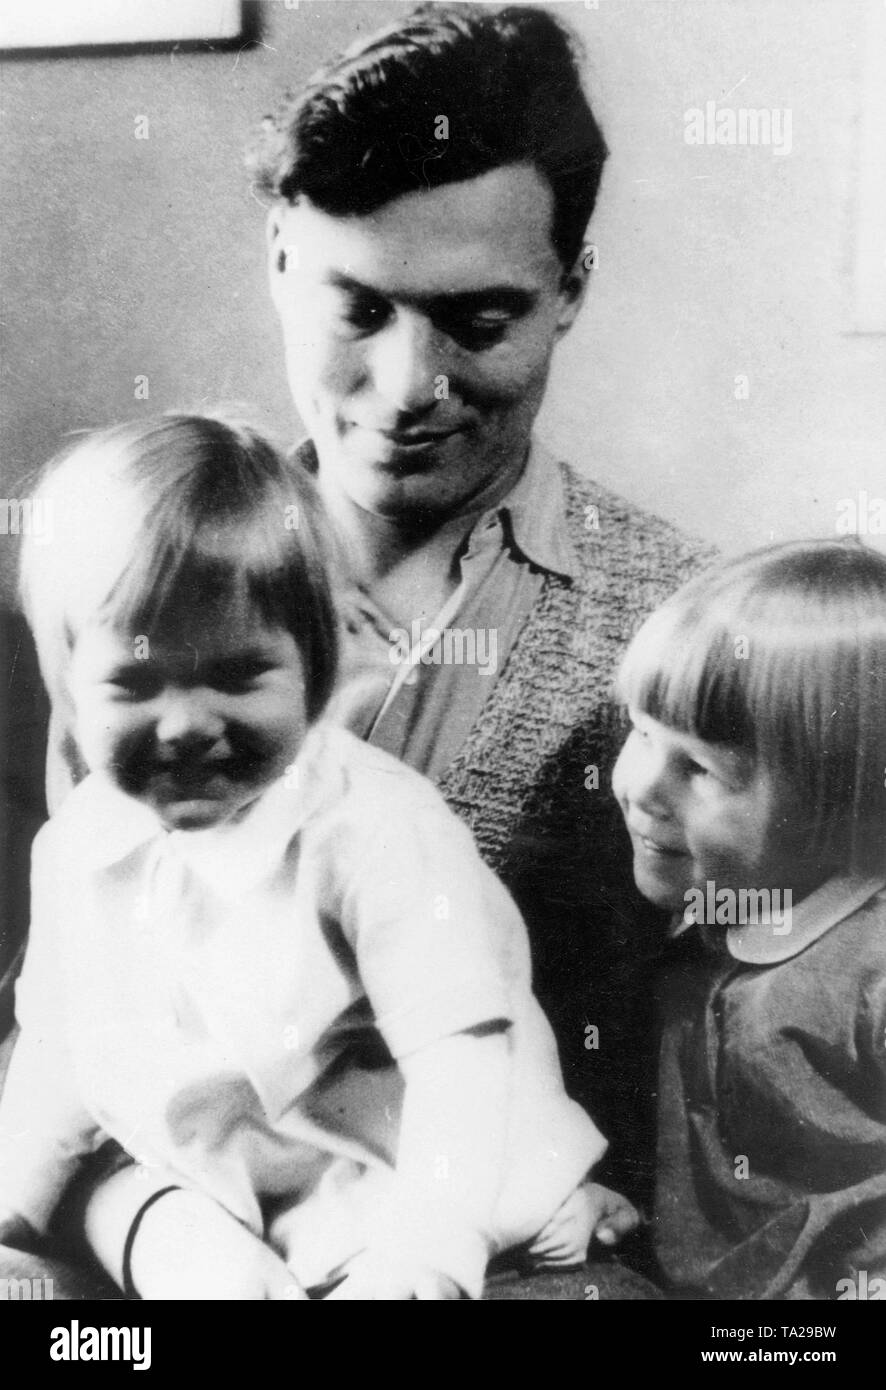 Claus Graf Schenk von Stauffenberg (1907-1944), German officer and resistance fighter, with his sons Franz Ludwig (left) and Heimeran (right). Stock Photo